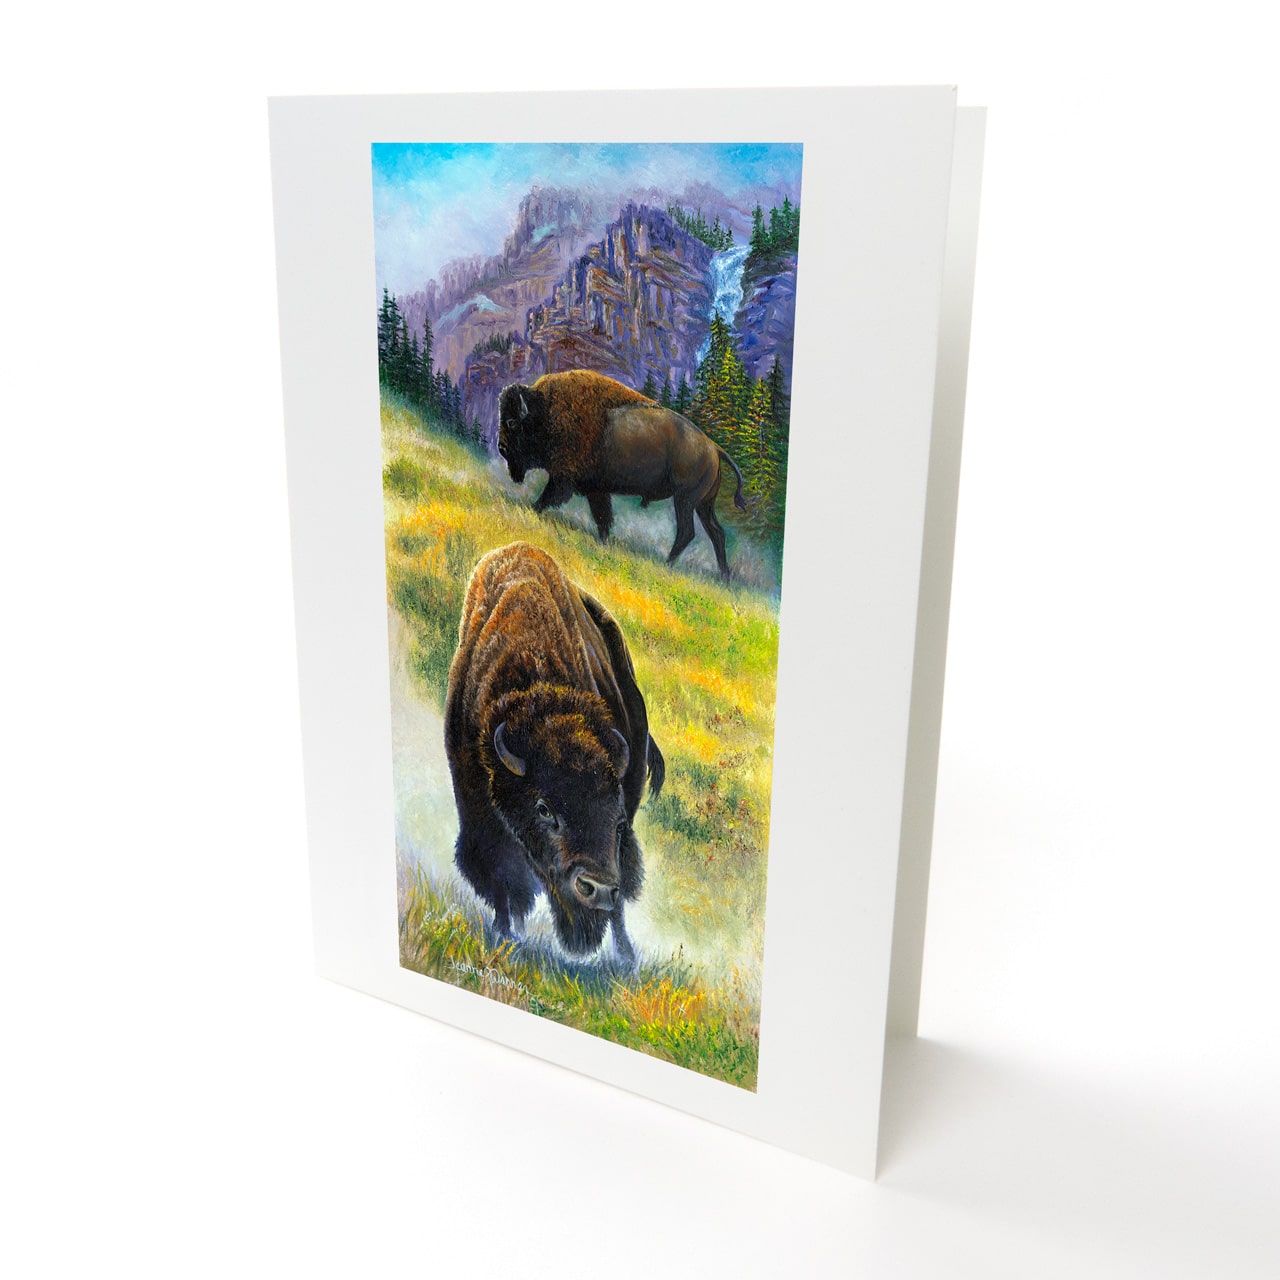 Bison Buffalo and Montana Mountains Art Card - "Double Threat"